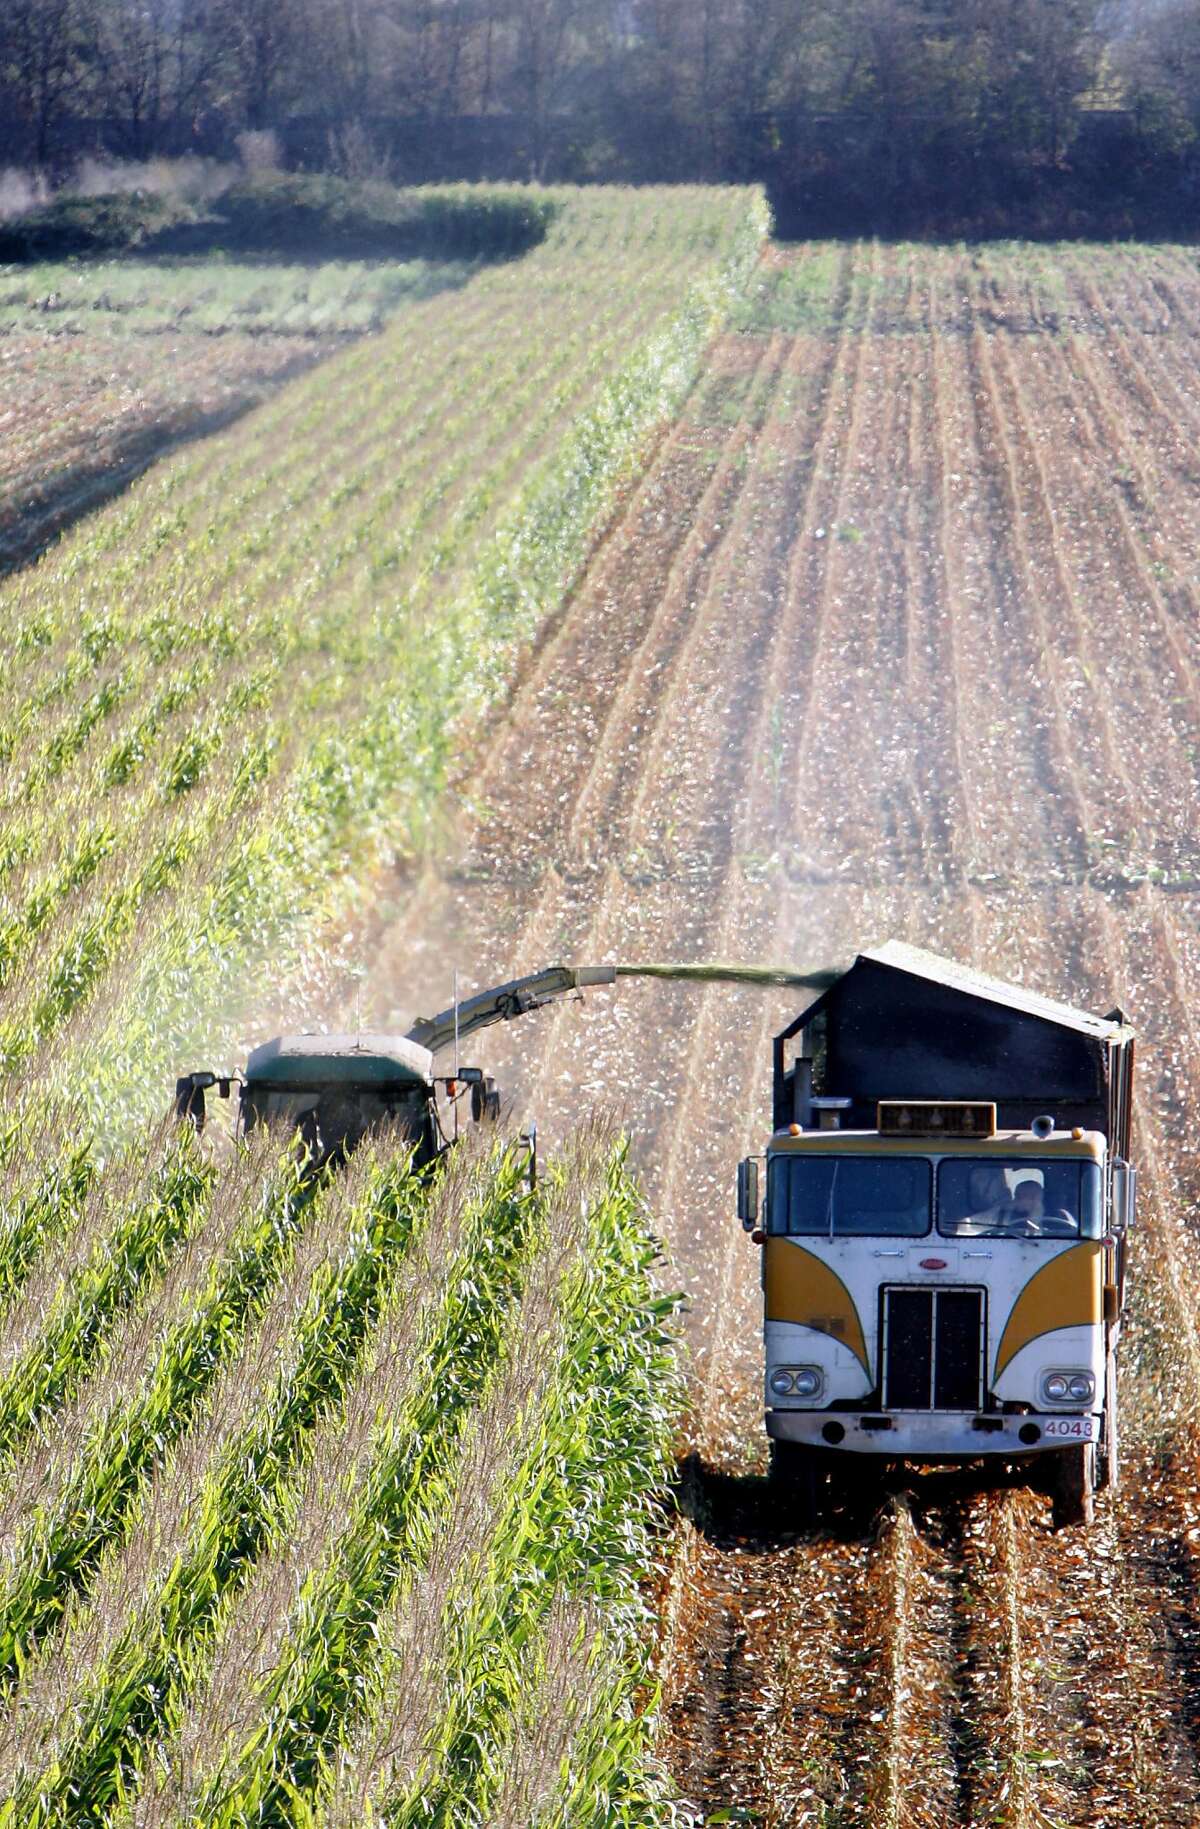 FILE - In this Monday, Oct. 31, 2005, picture, a harvester works through a field of genetically modified corn on the dairy farm owned by Al Lafranchi, near Santa Rosa, Calif. Scientists are far less worried about genetically modified food, pesticide use, and nuclear power than is the general public, according to matching polls of both the general public and the country's largest general science organization. (AP Photo/Rich Pedroncelli, File)